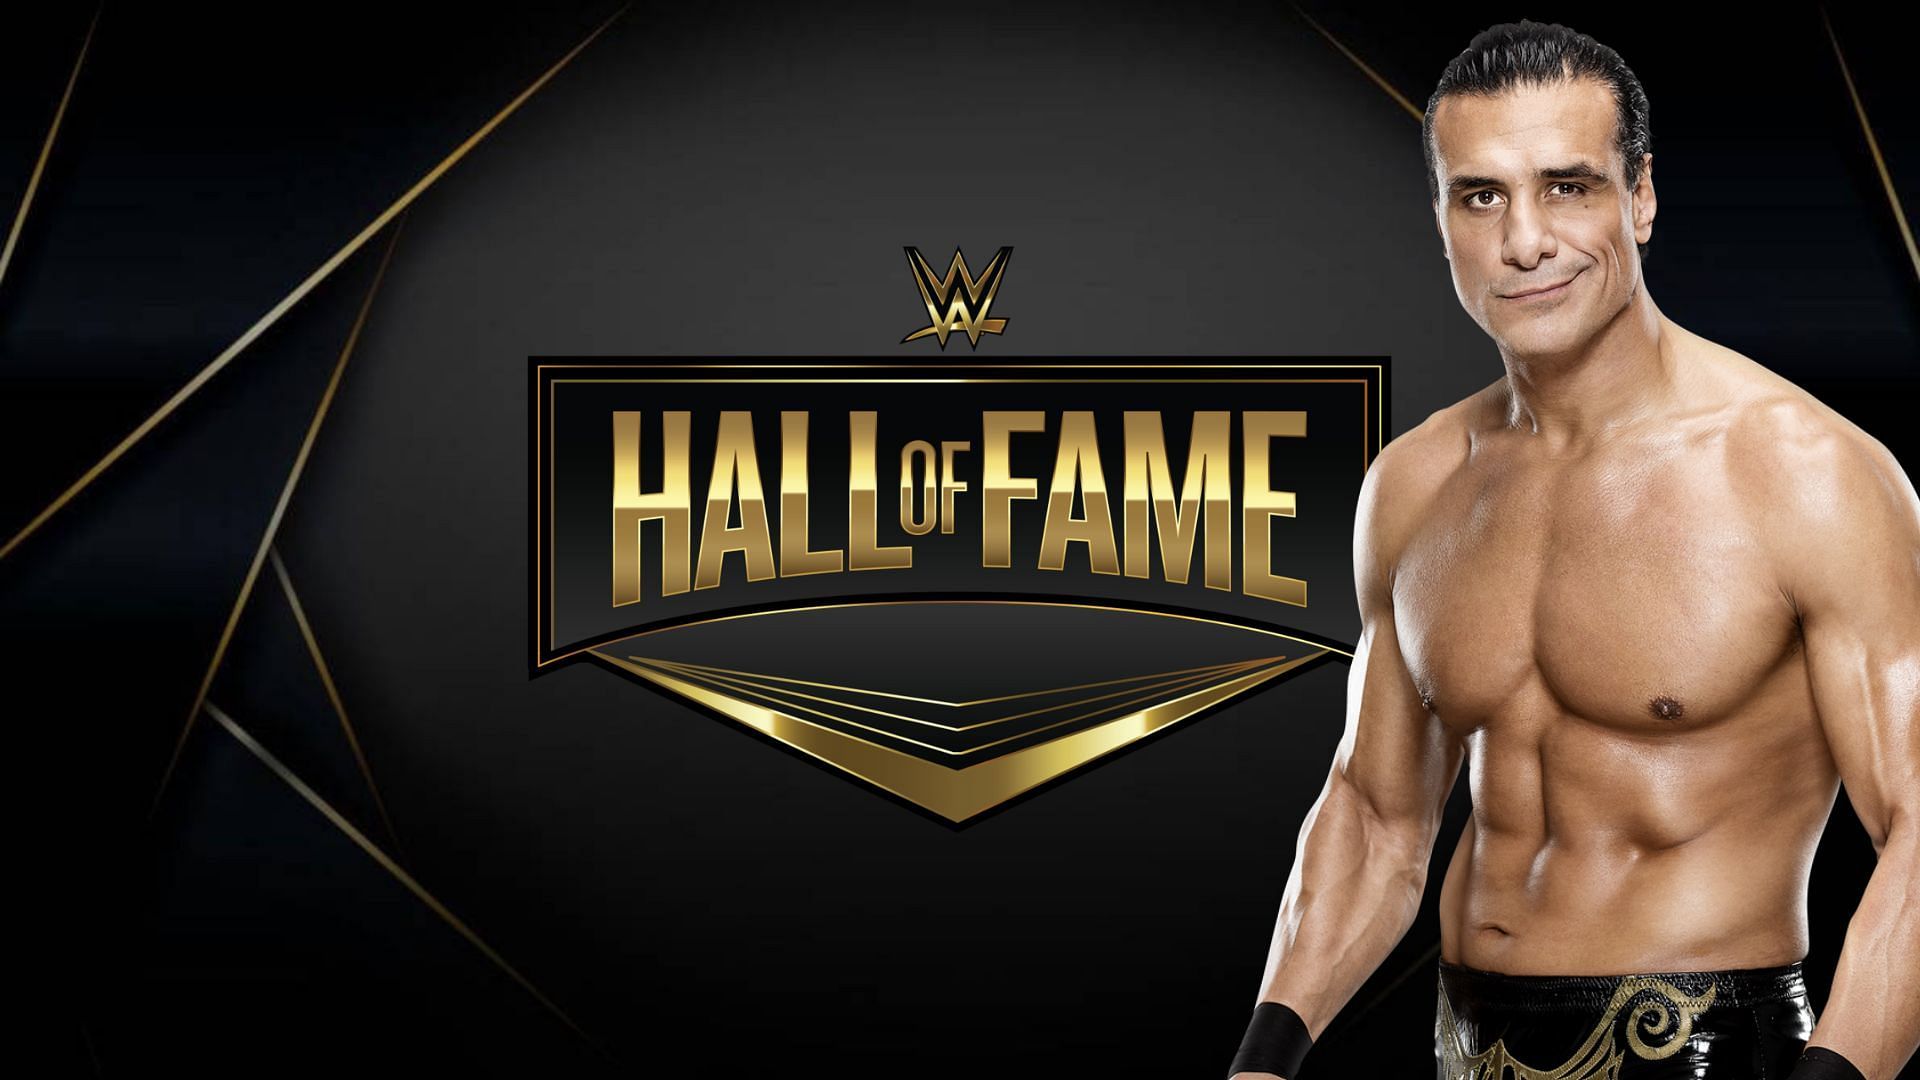 Should WWE induct Alberto Del Rio into the Hall of Fame?